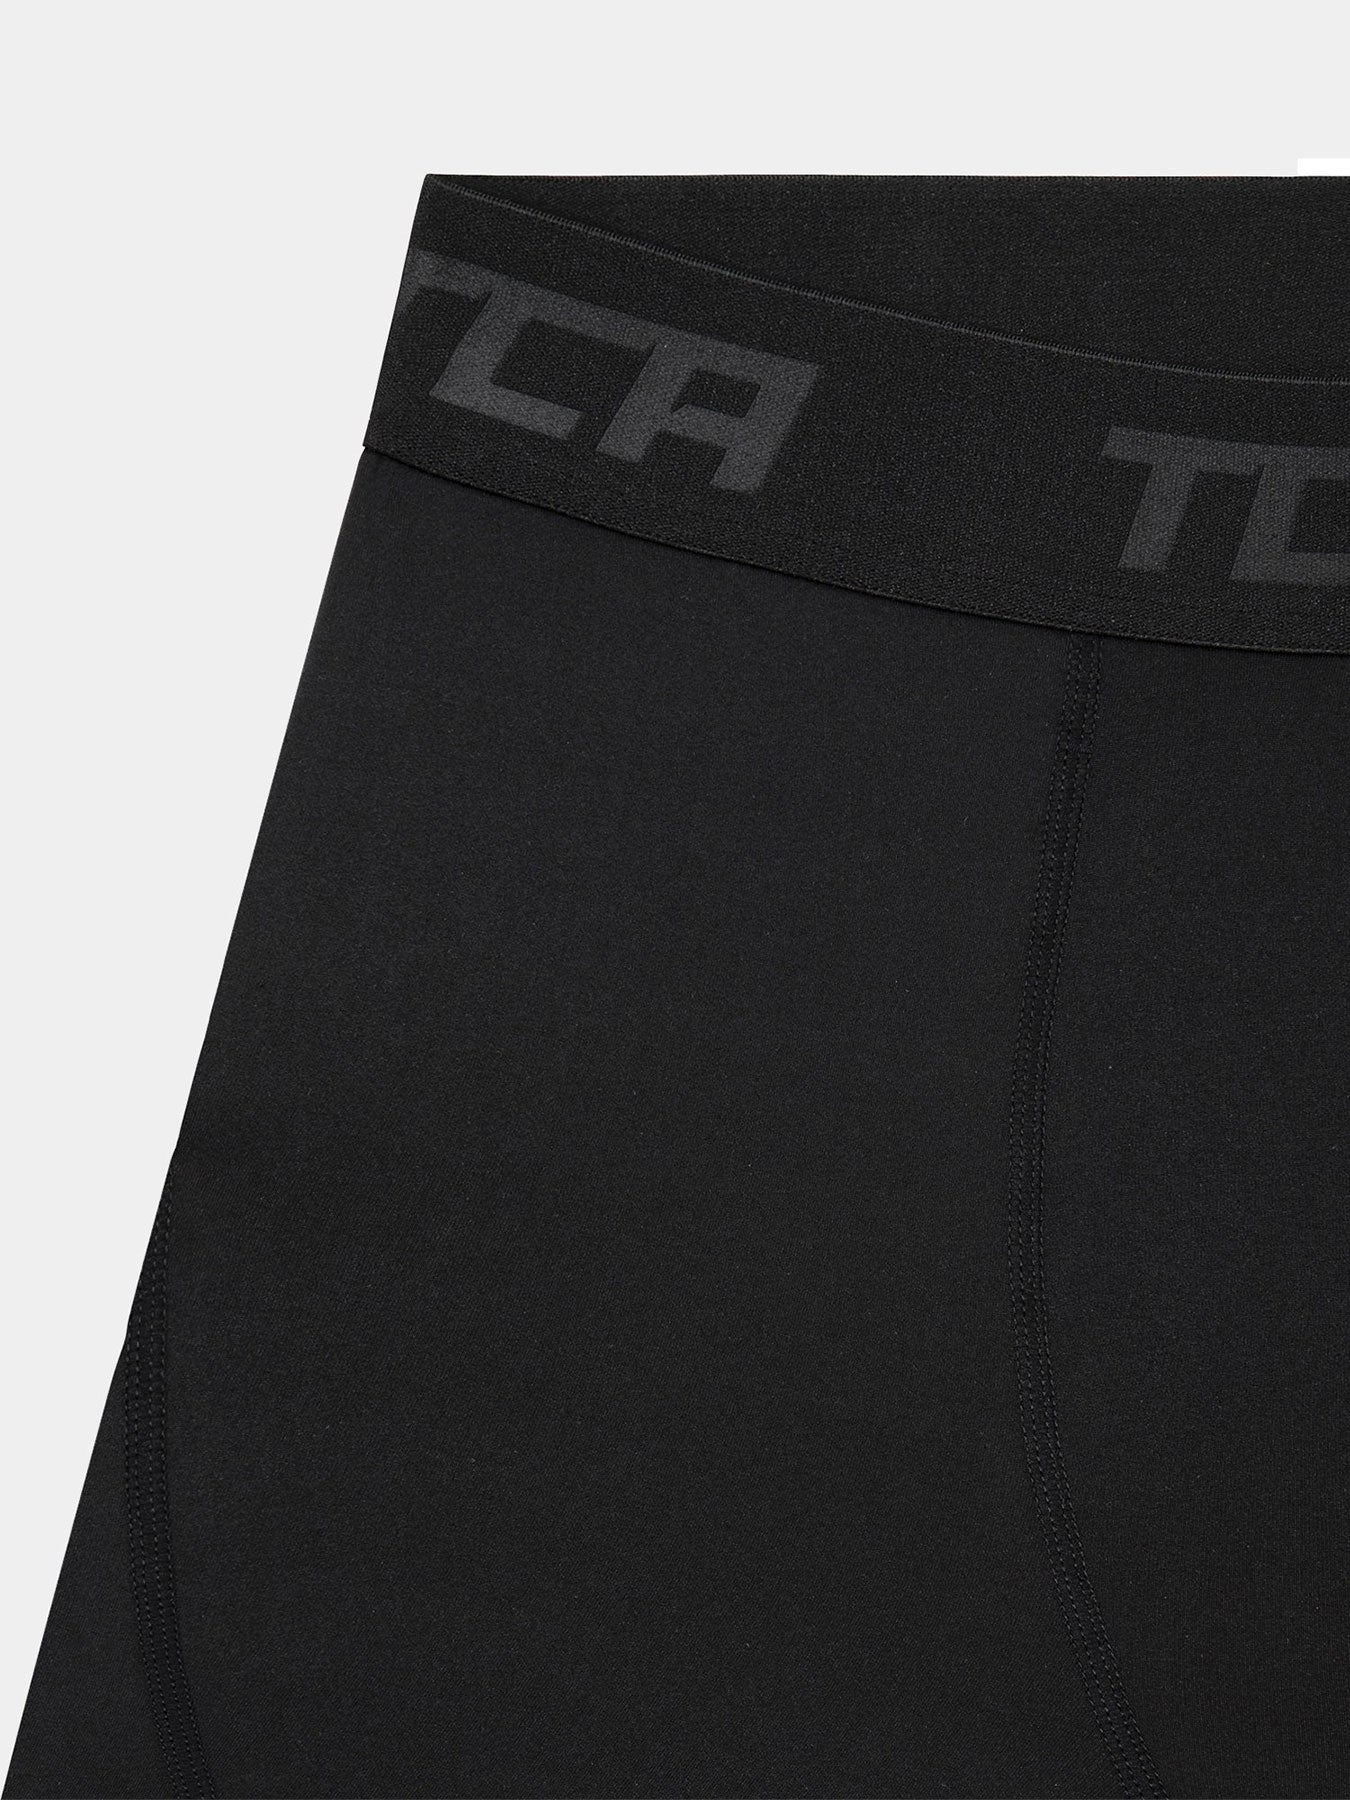 Pro Performance Compression Base Layer Tights For Boys